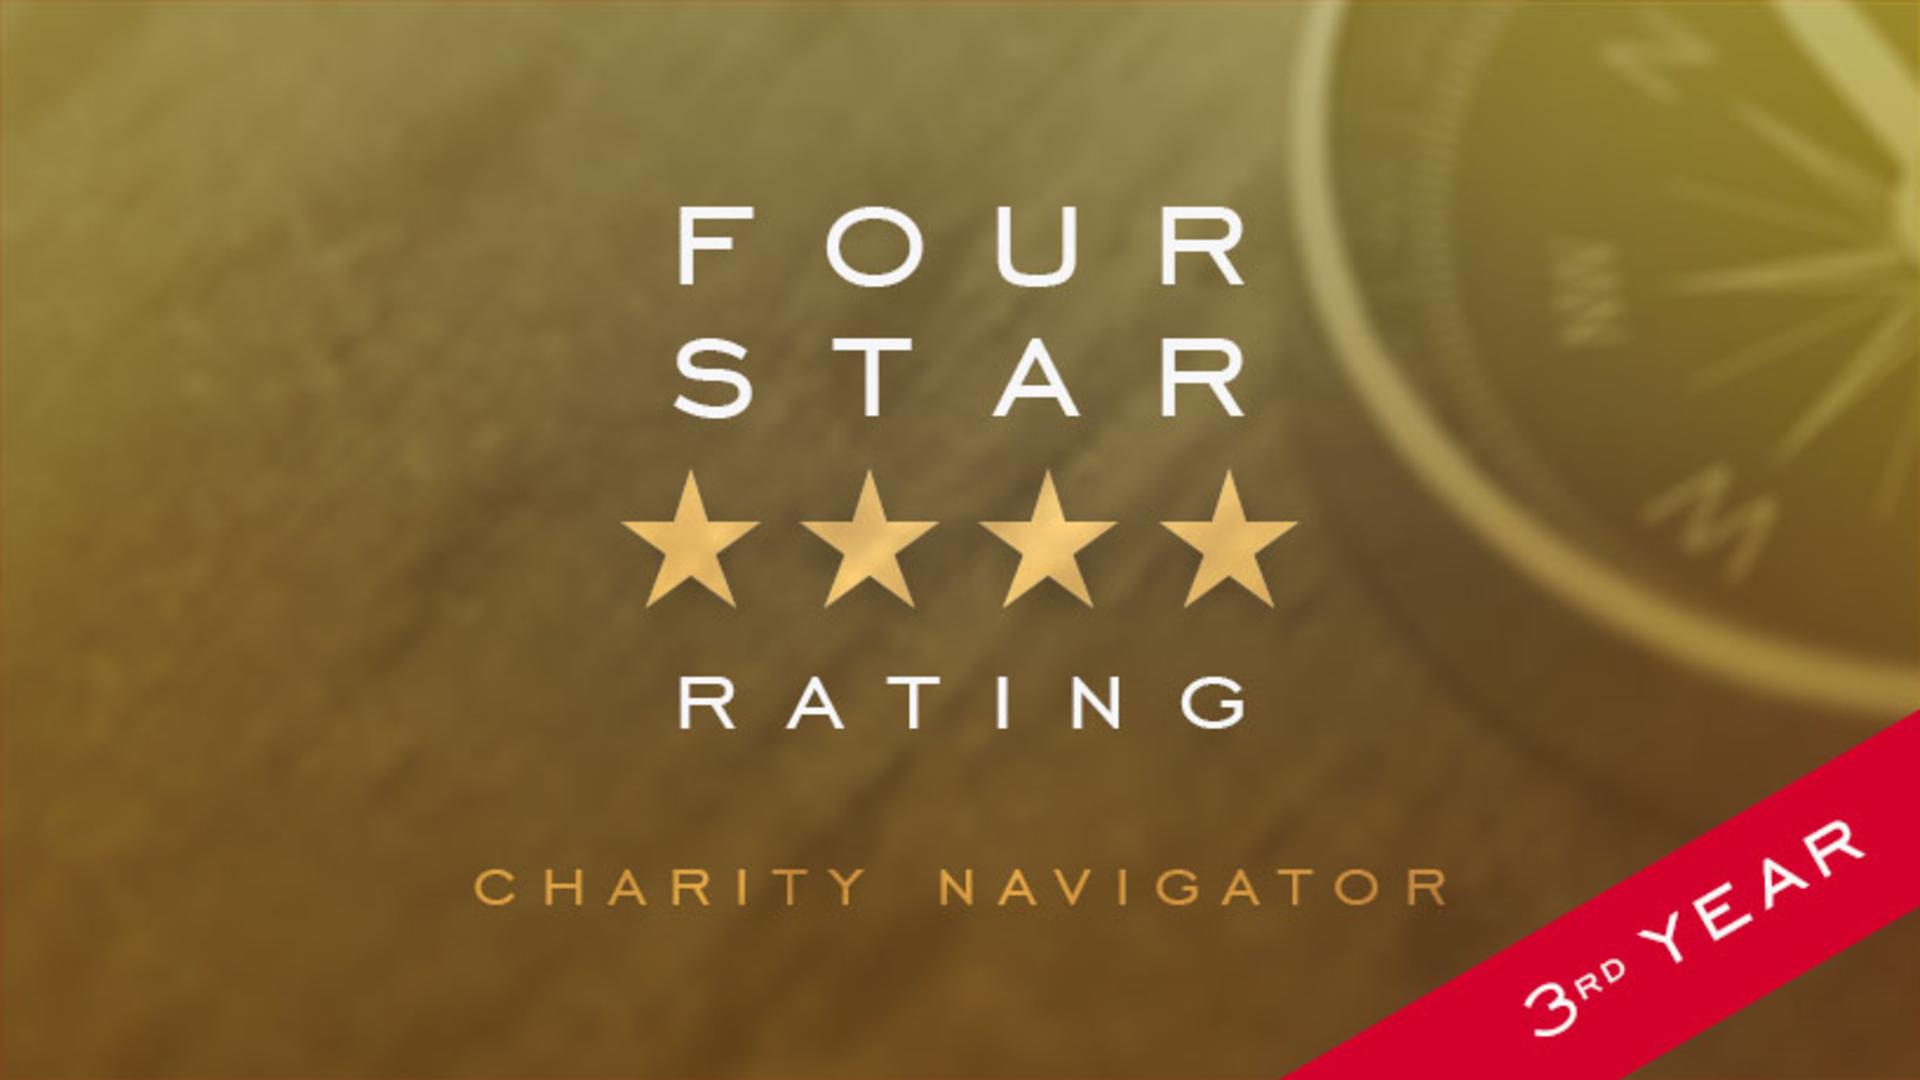 Four Star Rating from Charity Navigator blog and homepage slide